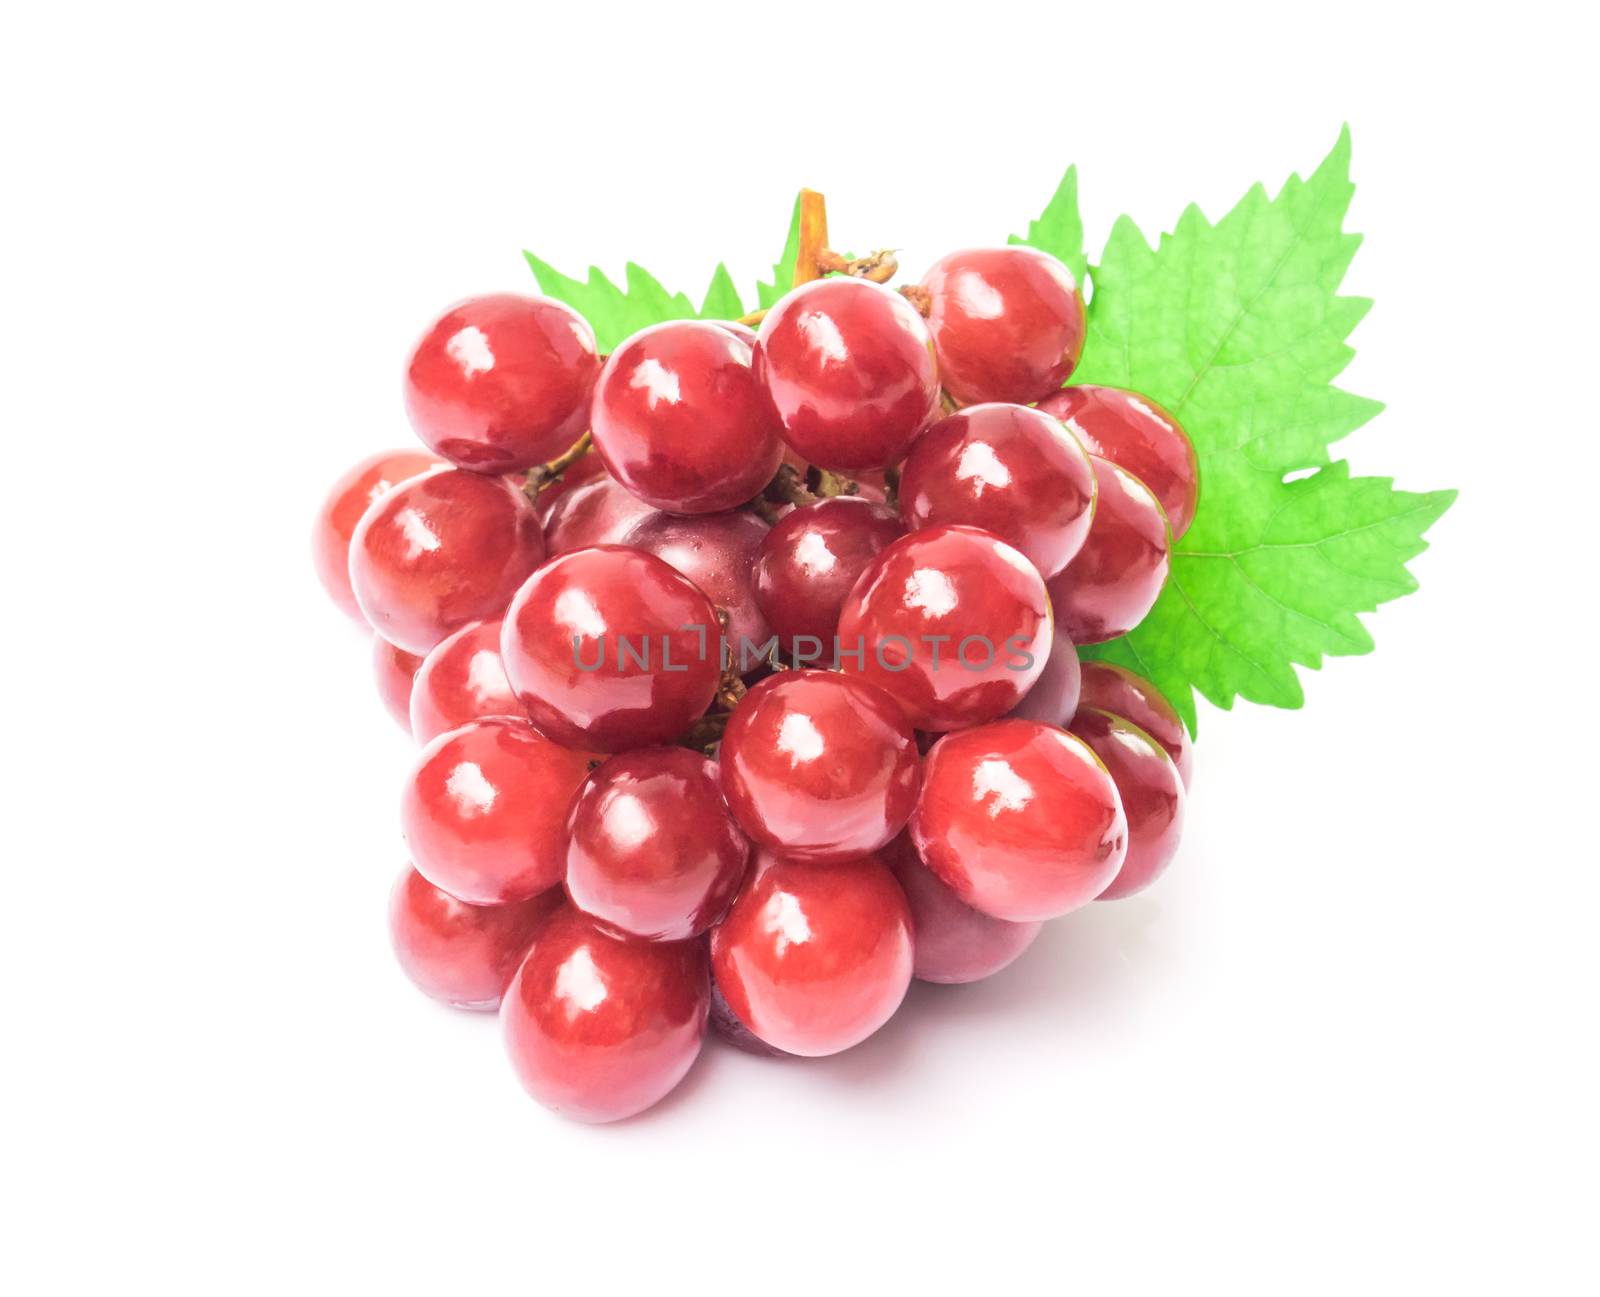 Ripe red grape with leaf on white background, fruit healthy conc by pt.pongsak@gmail.com